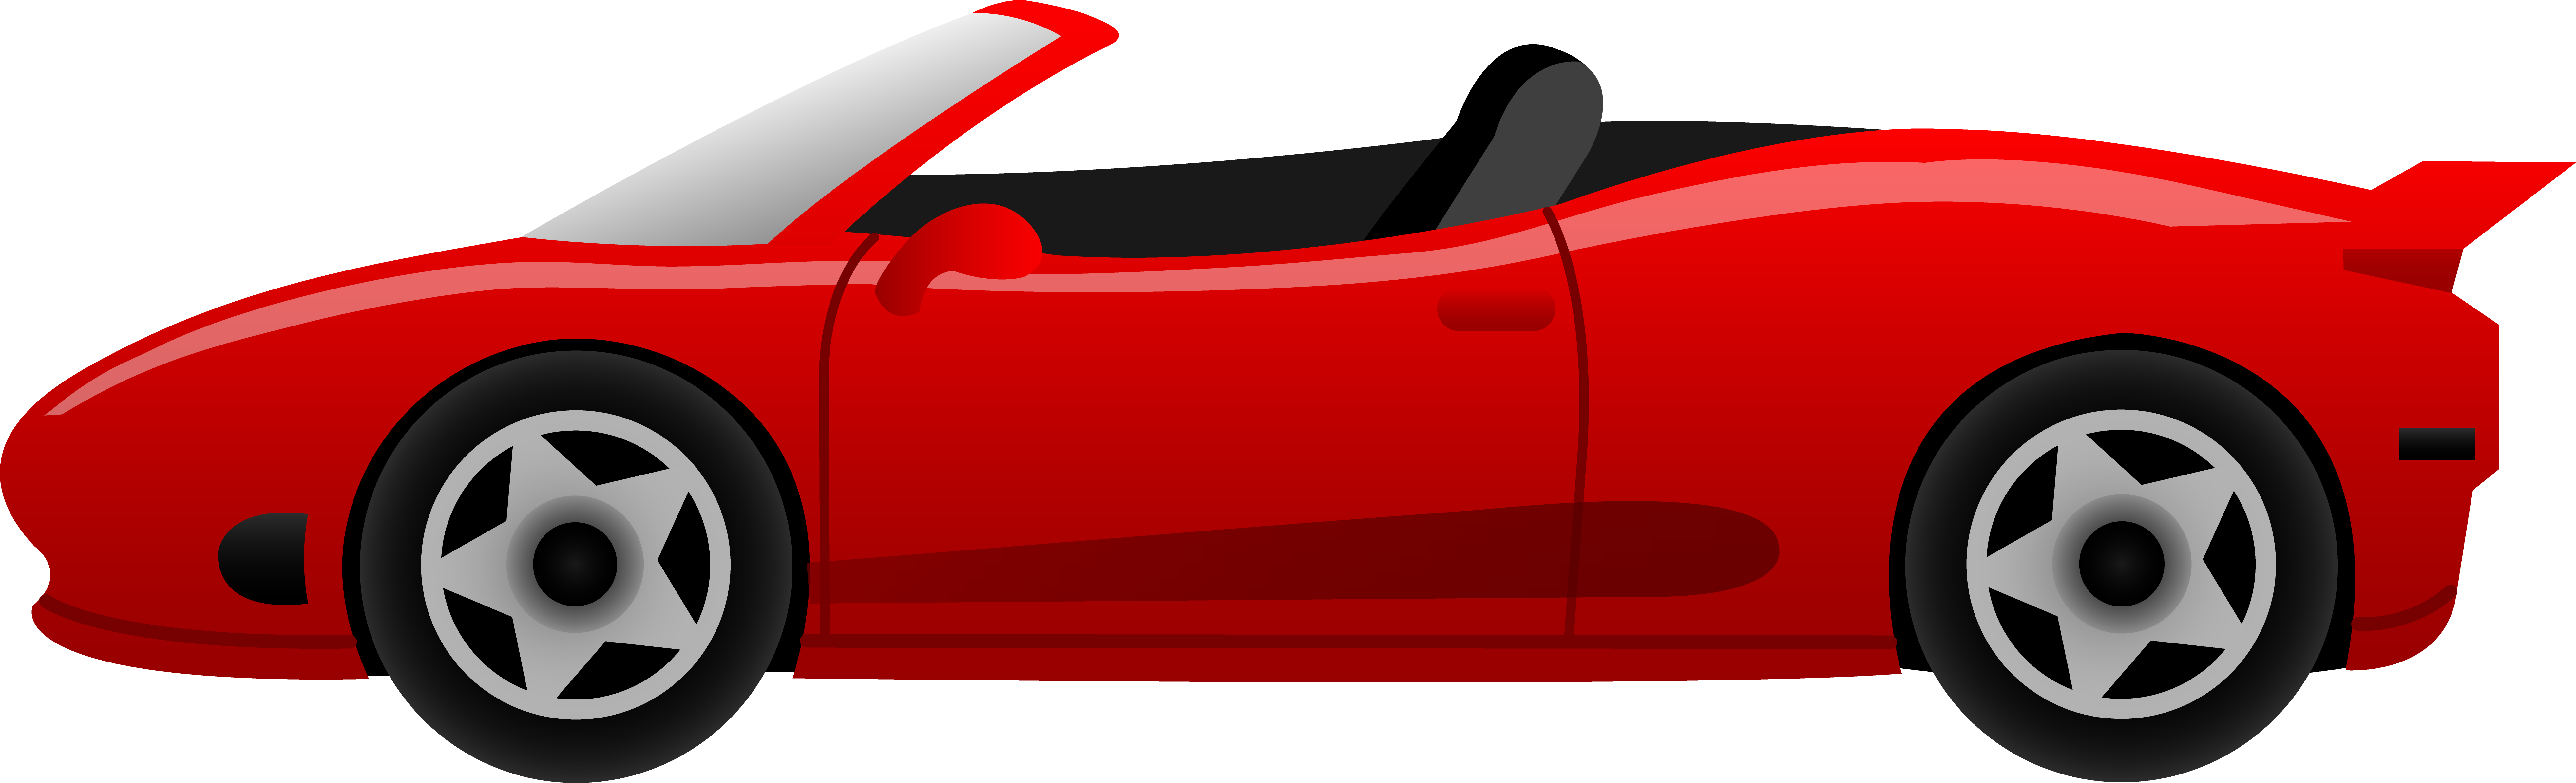 Sports car clipart side view free clipart images